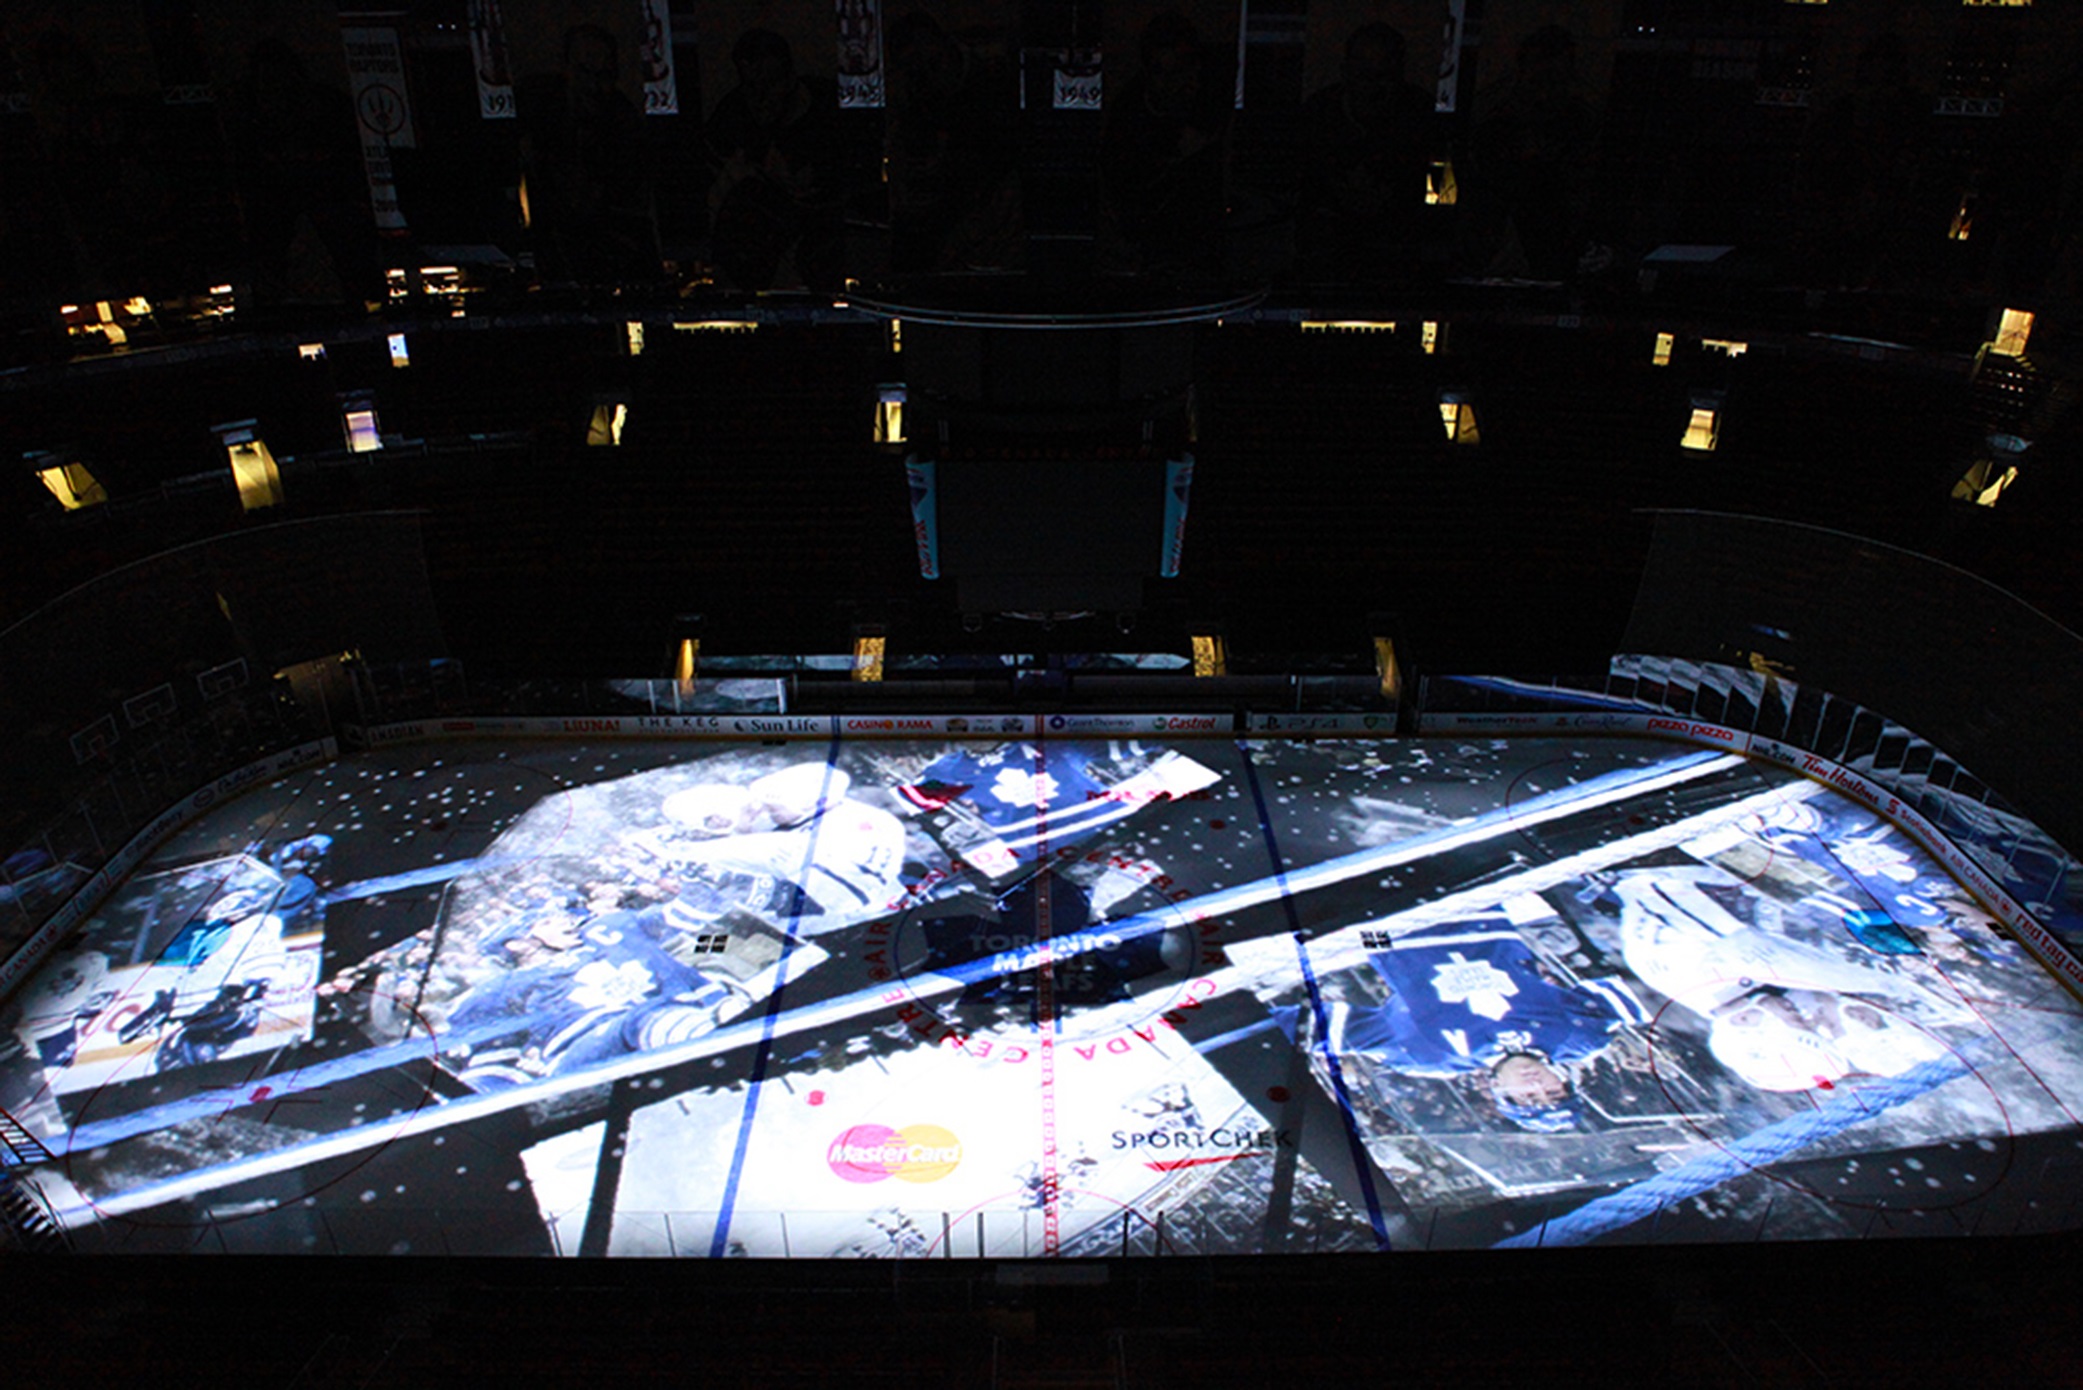 Christie, Solotech Create Stunning OnIce Projection at Air Canada Centre